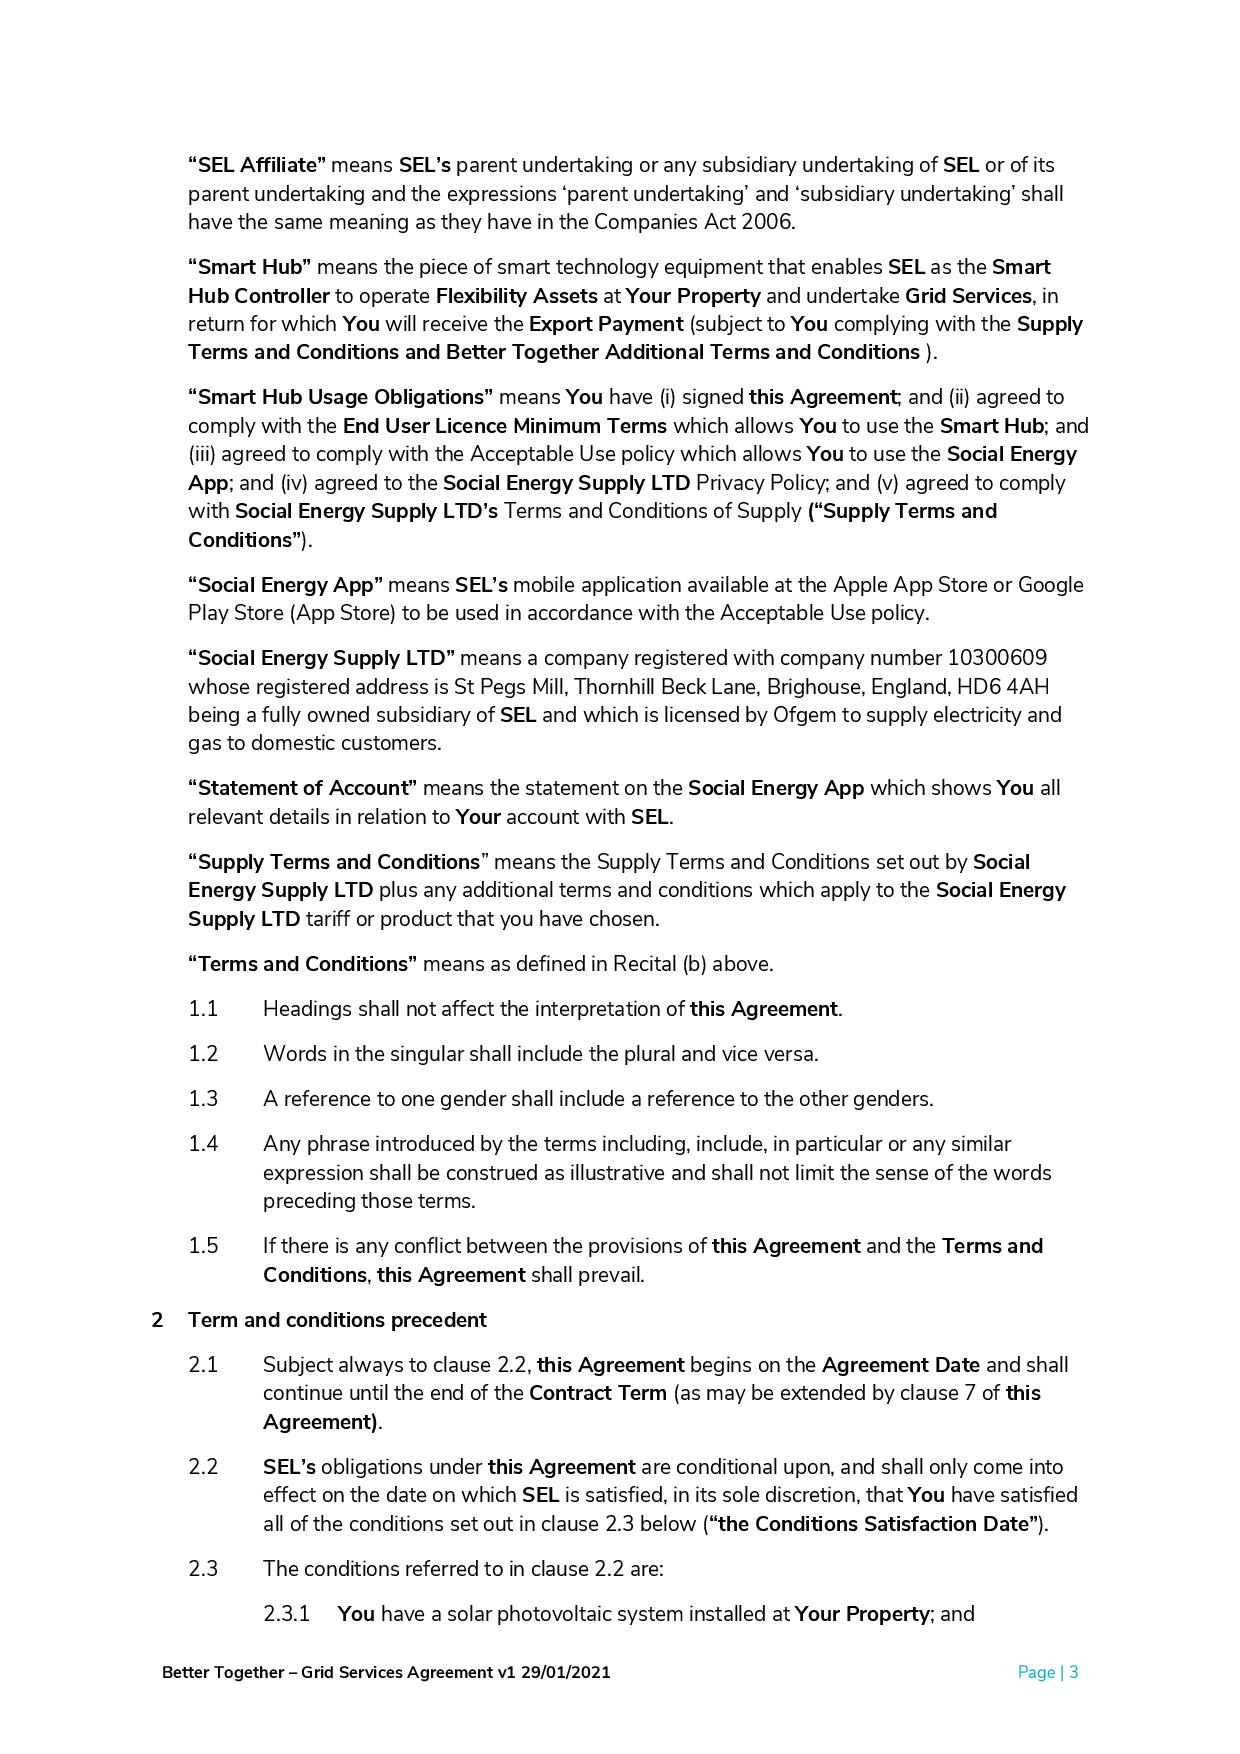 Better_Together_-_Grid_Services_Agreement-page-004.jpg